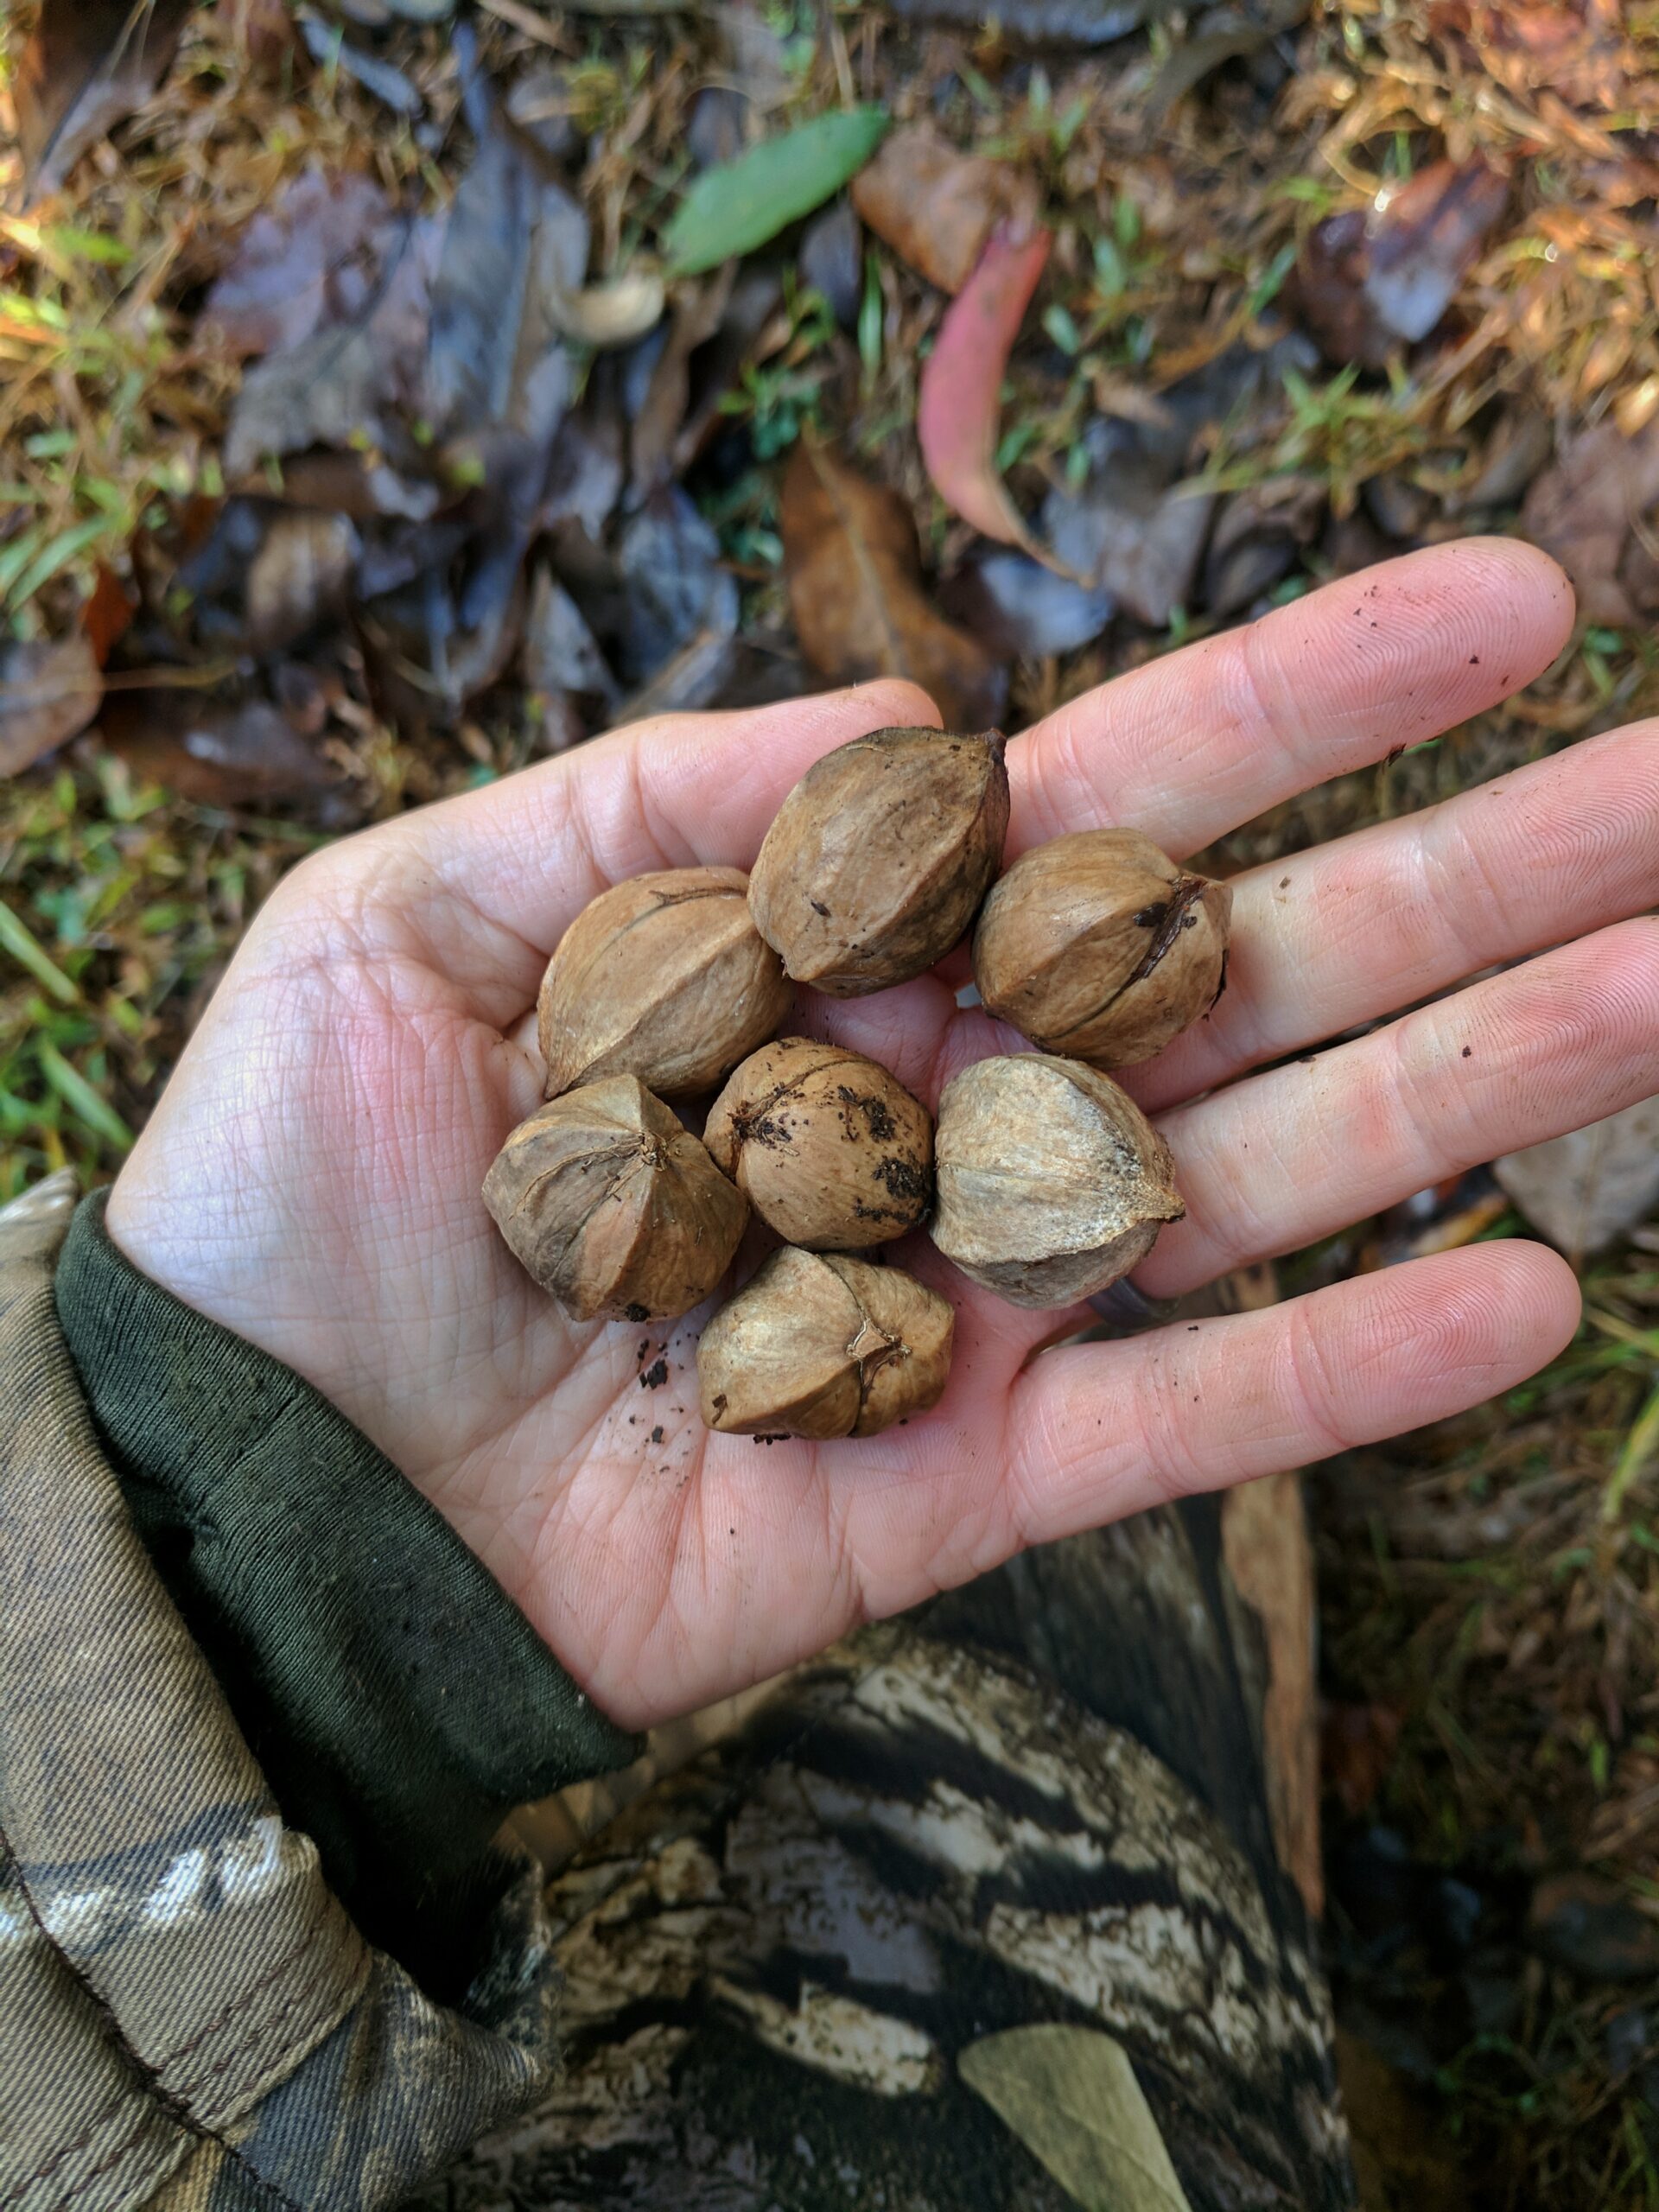 A hunter holds a handful of hickory nuts, a major food source for squirrels.